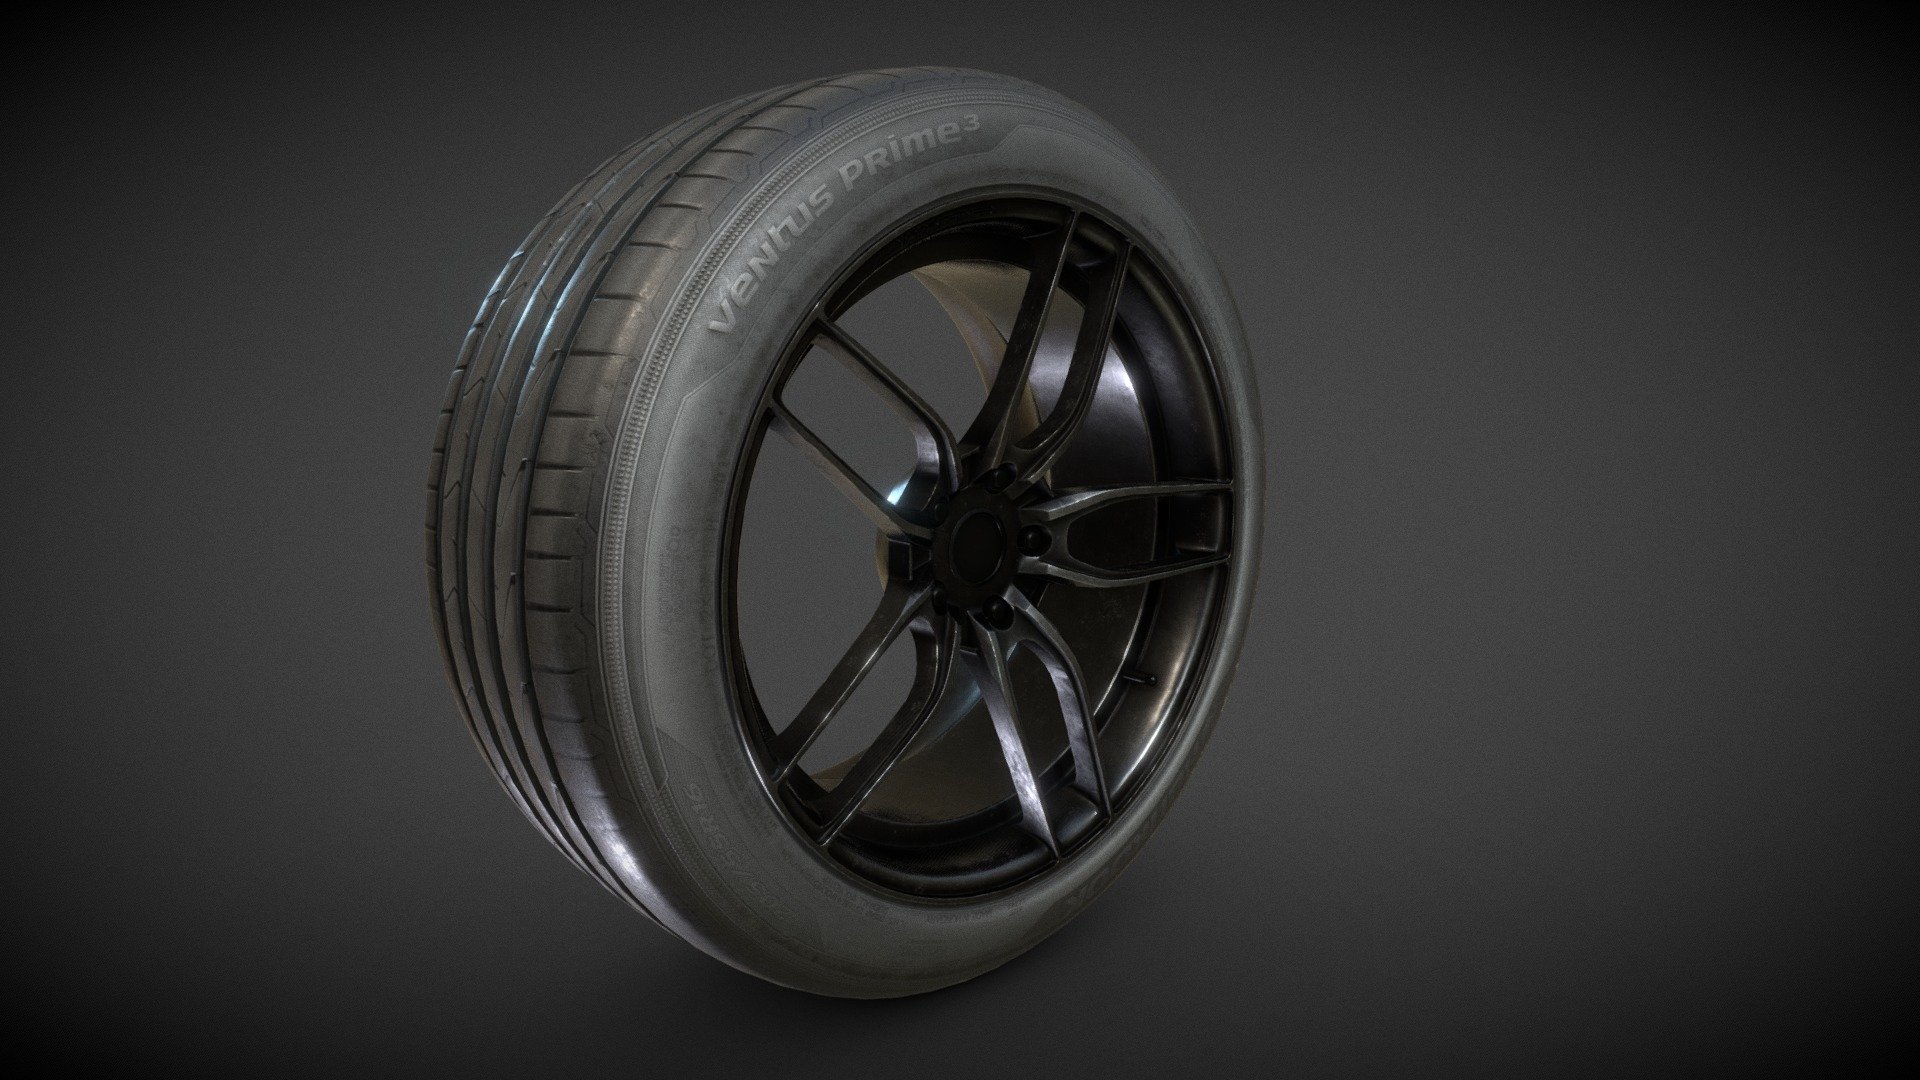 Sport tire on a sport rim. perfect wheels for a track day.
high detailed 8k resolution pbr textures 3d model